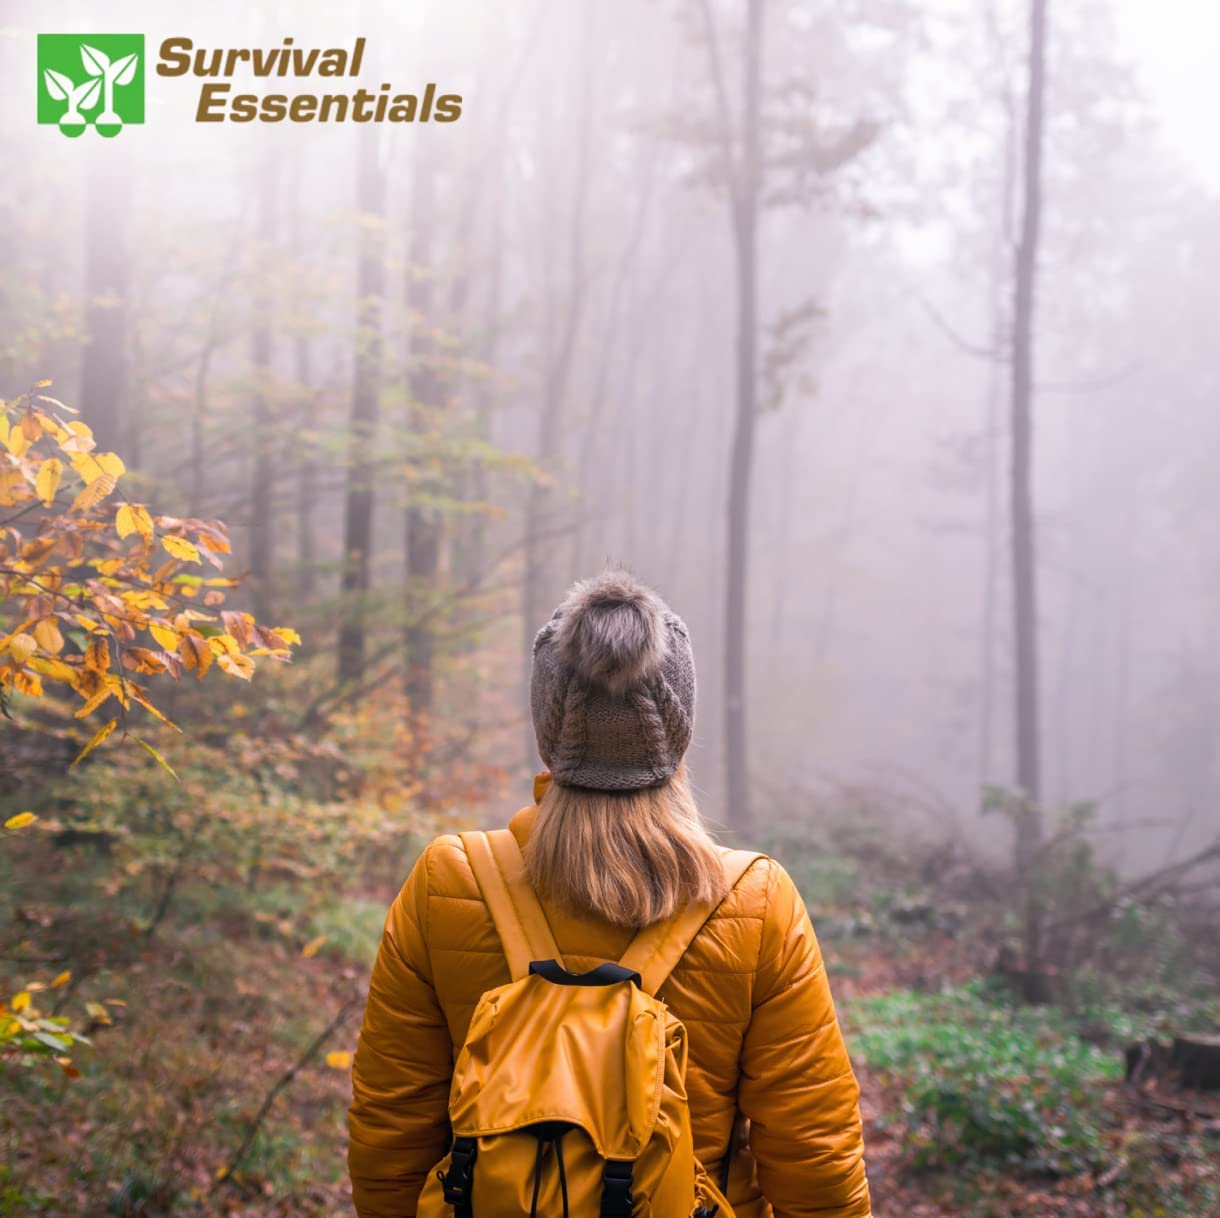 Woman standing in forest with Survival Essentials logo in the background, representing outdoor adventure and preparedness